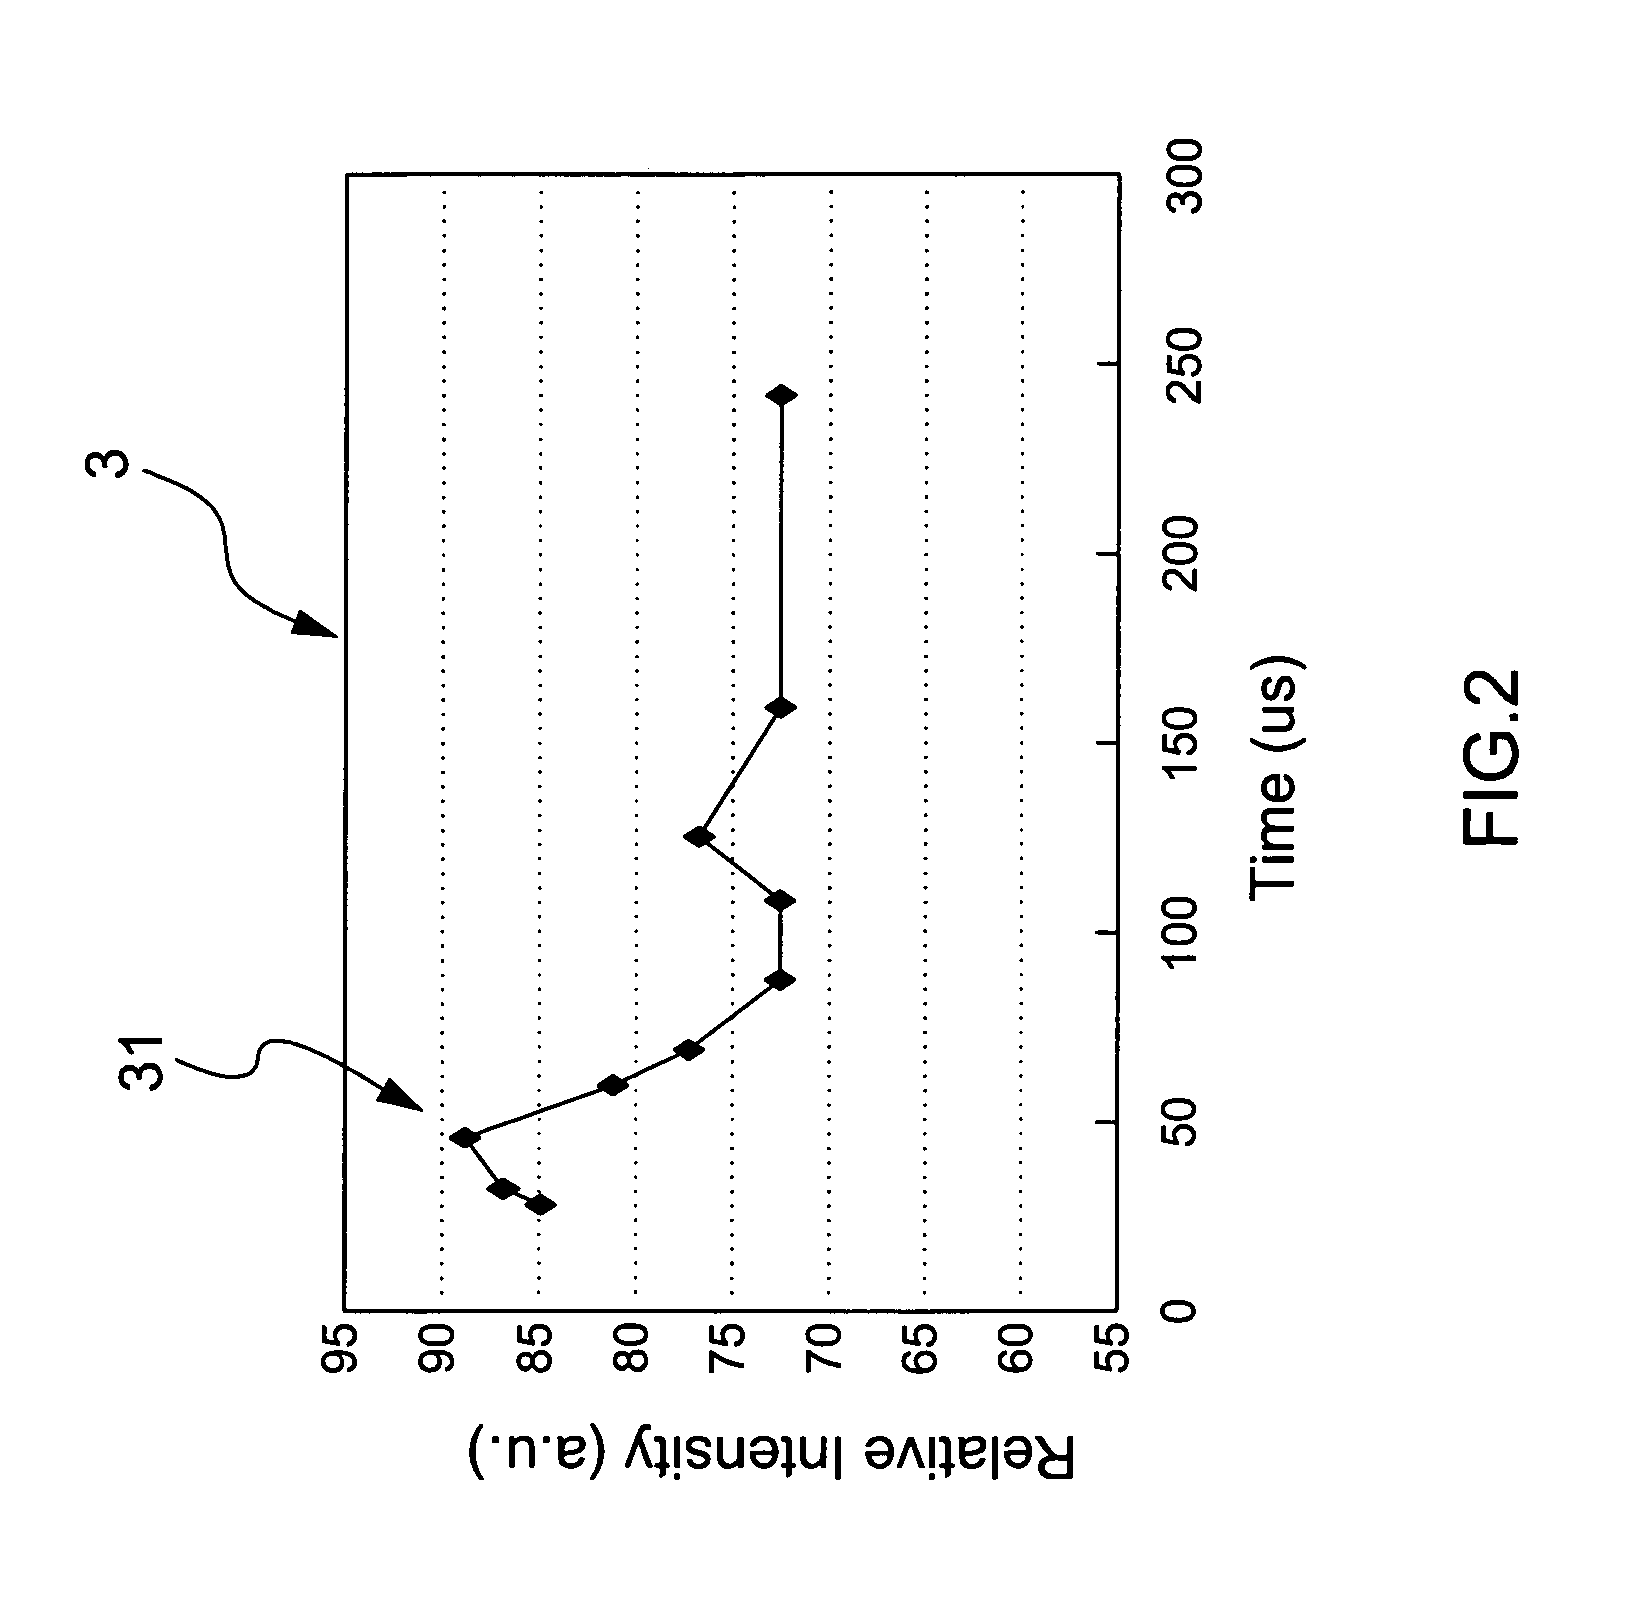 Apparatus of triple-electrode dielectric barrier discharge at atmospheric pressure